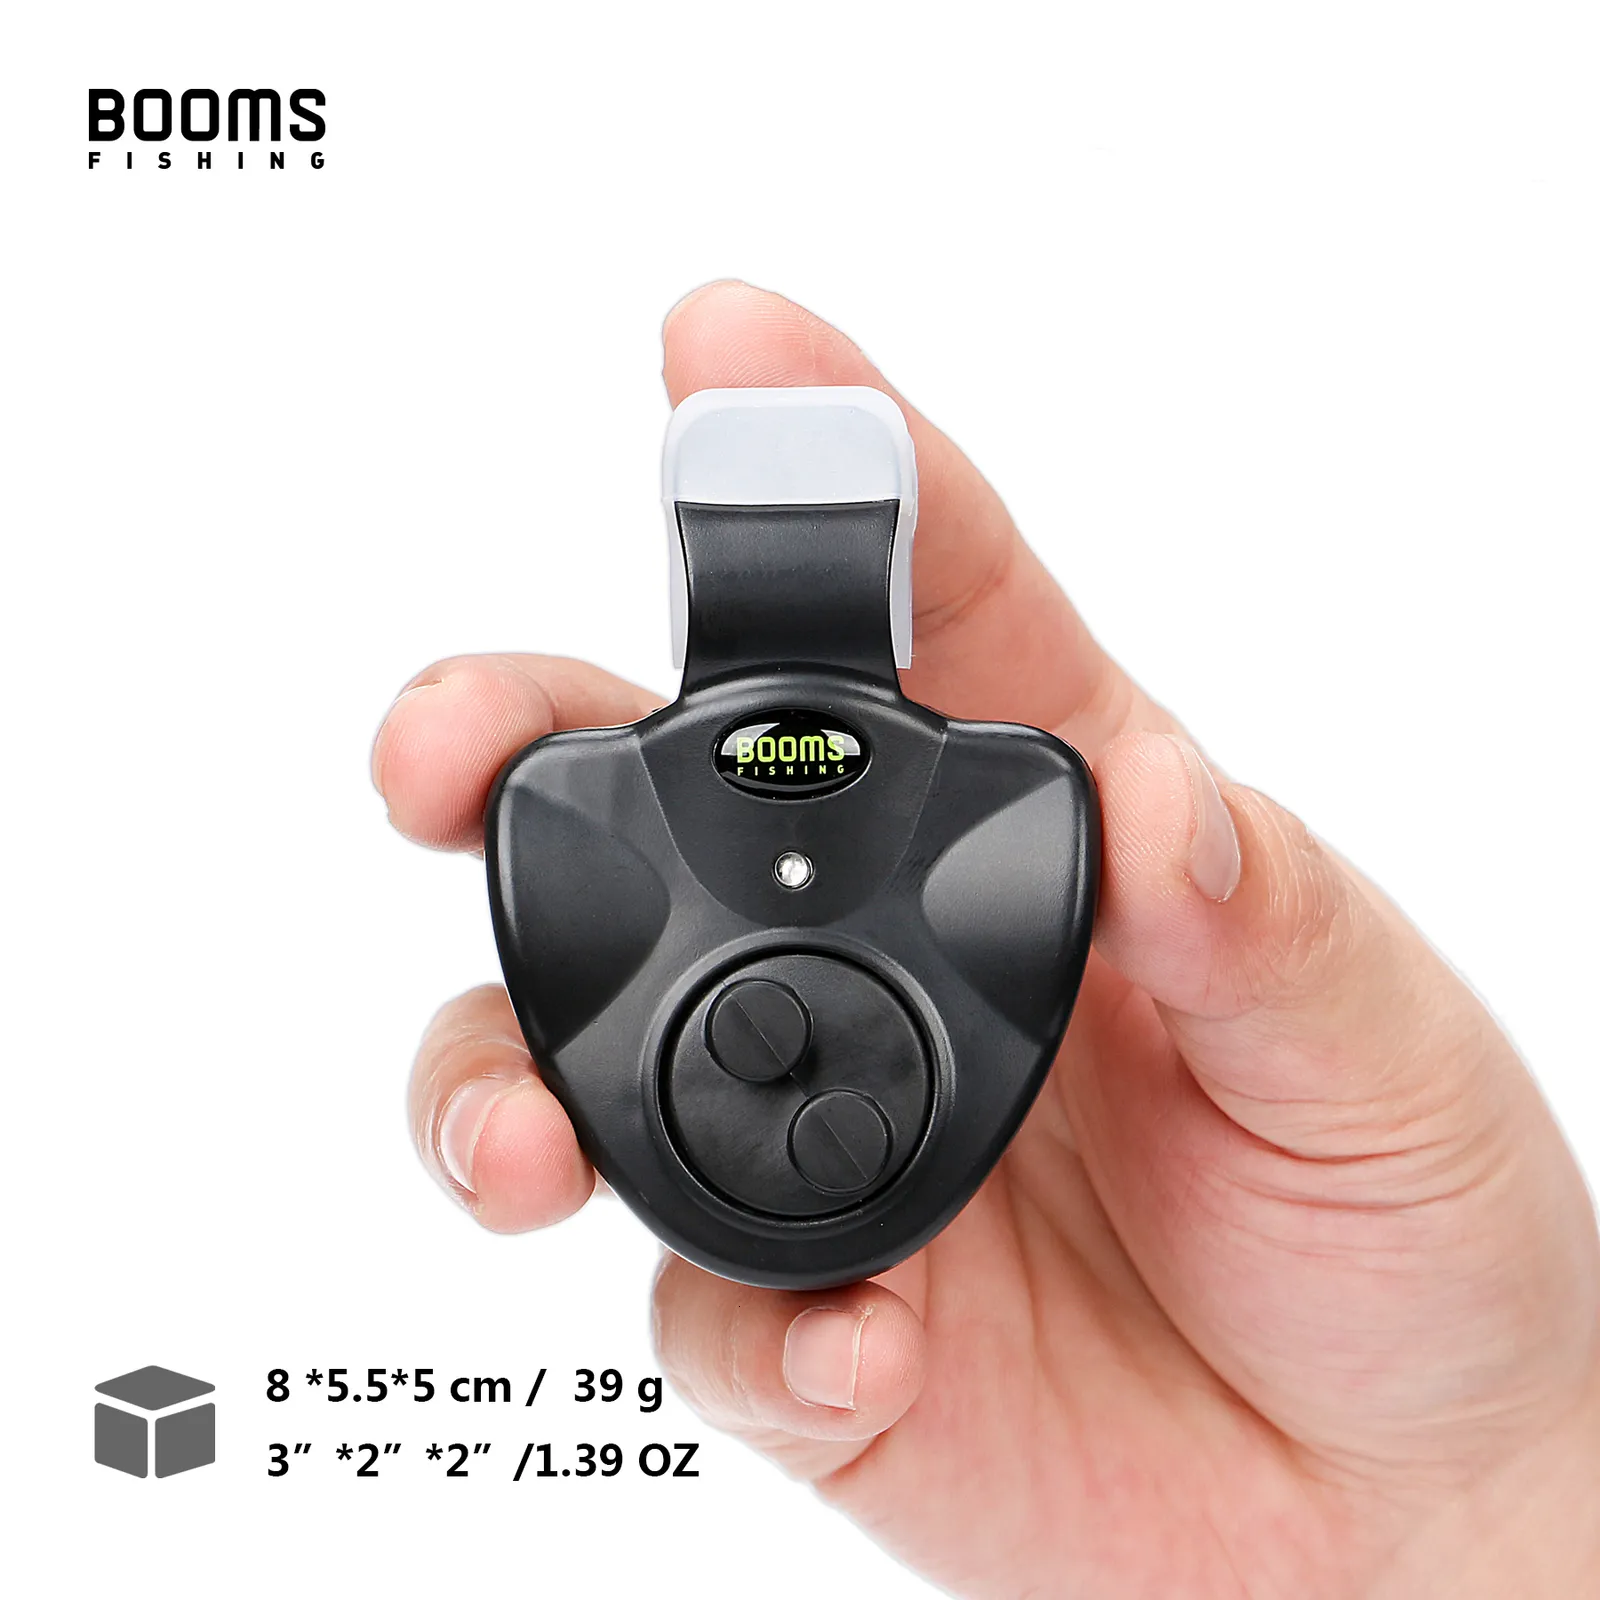 Fishing Accessories Booms E01 Fish Bite Alarm Electronic Buzzer On Rod With Loud  Siren Daytime Night Indicator LED Light 230512 From Diao09, $9.68